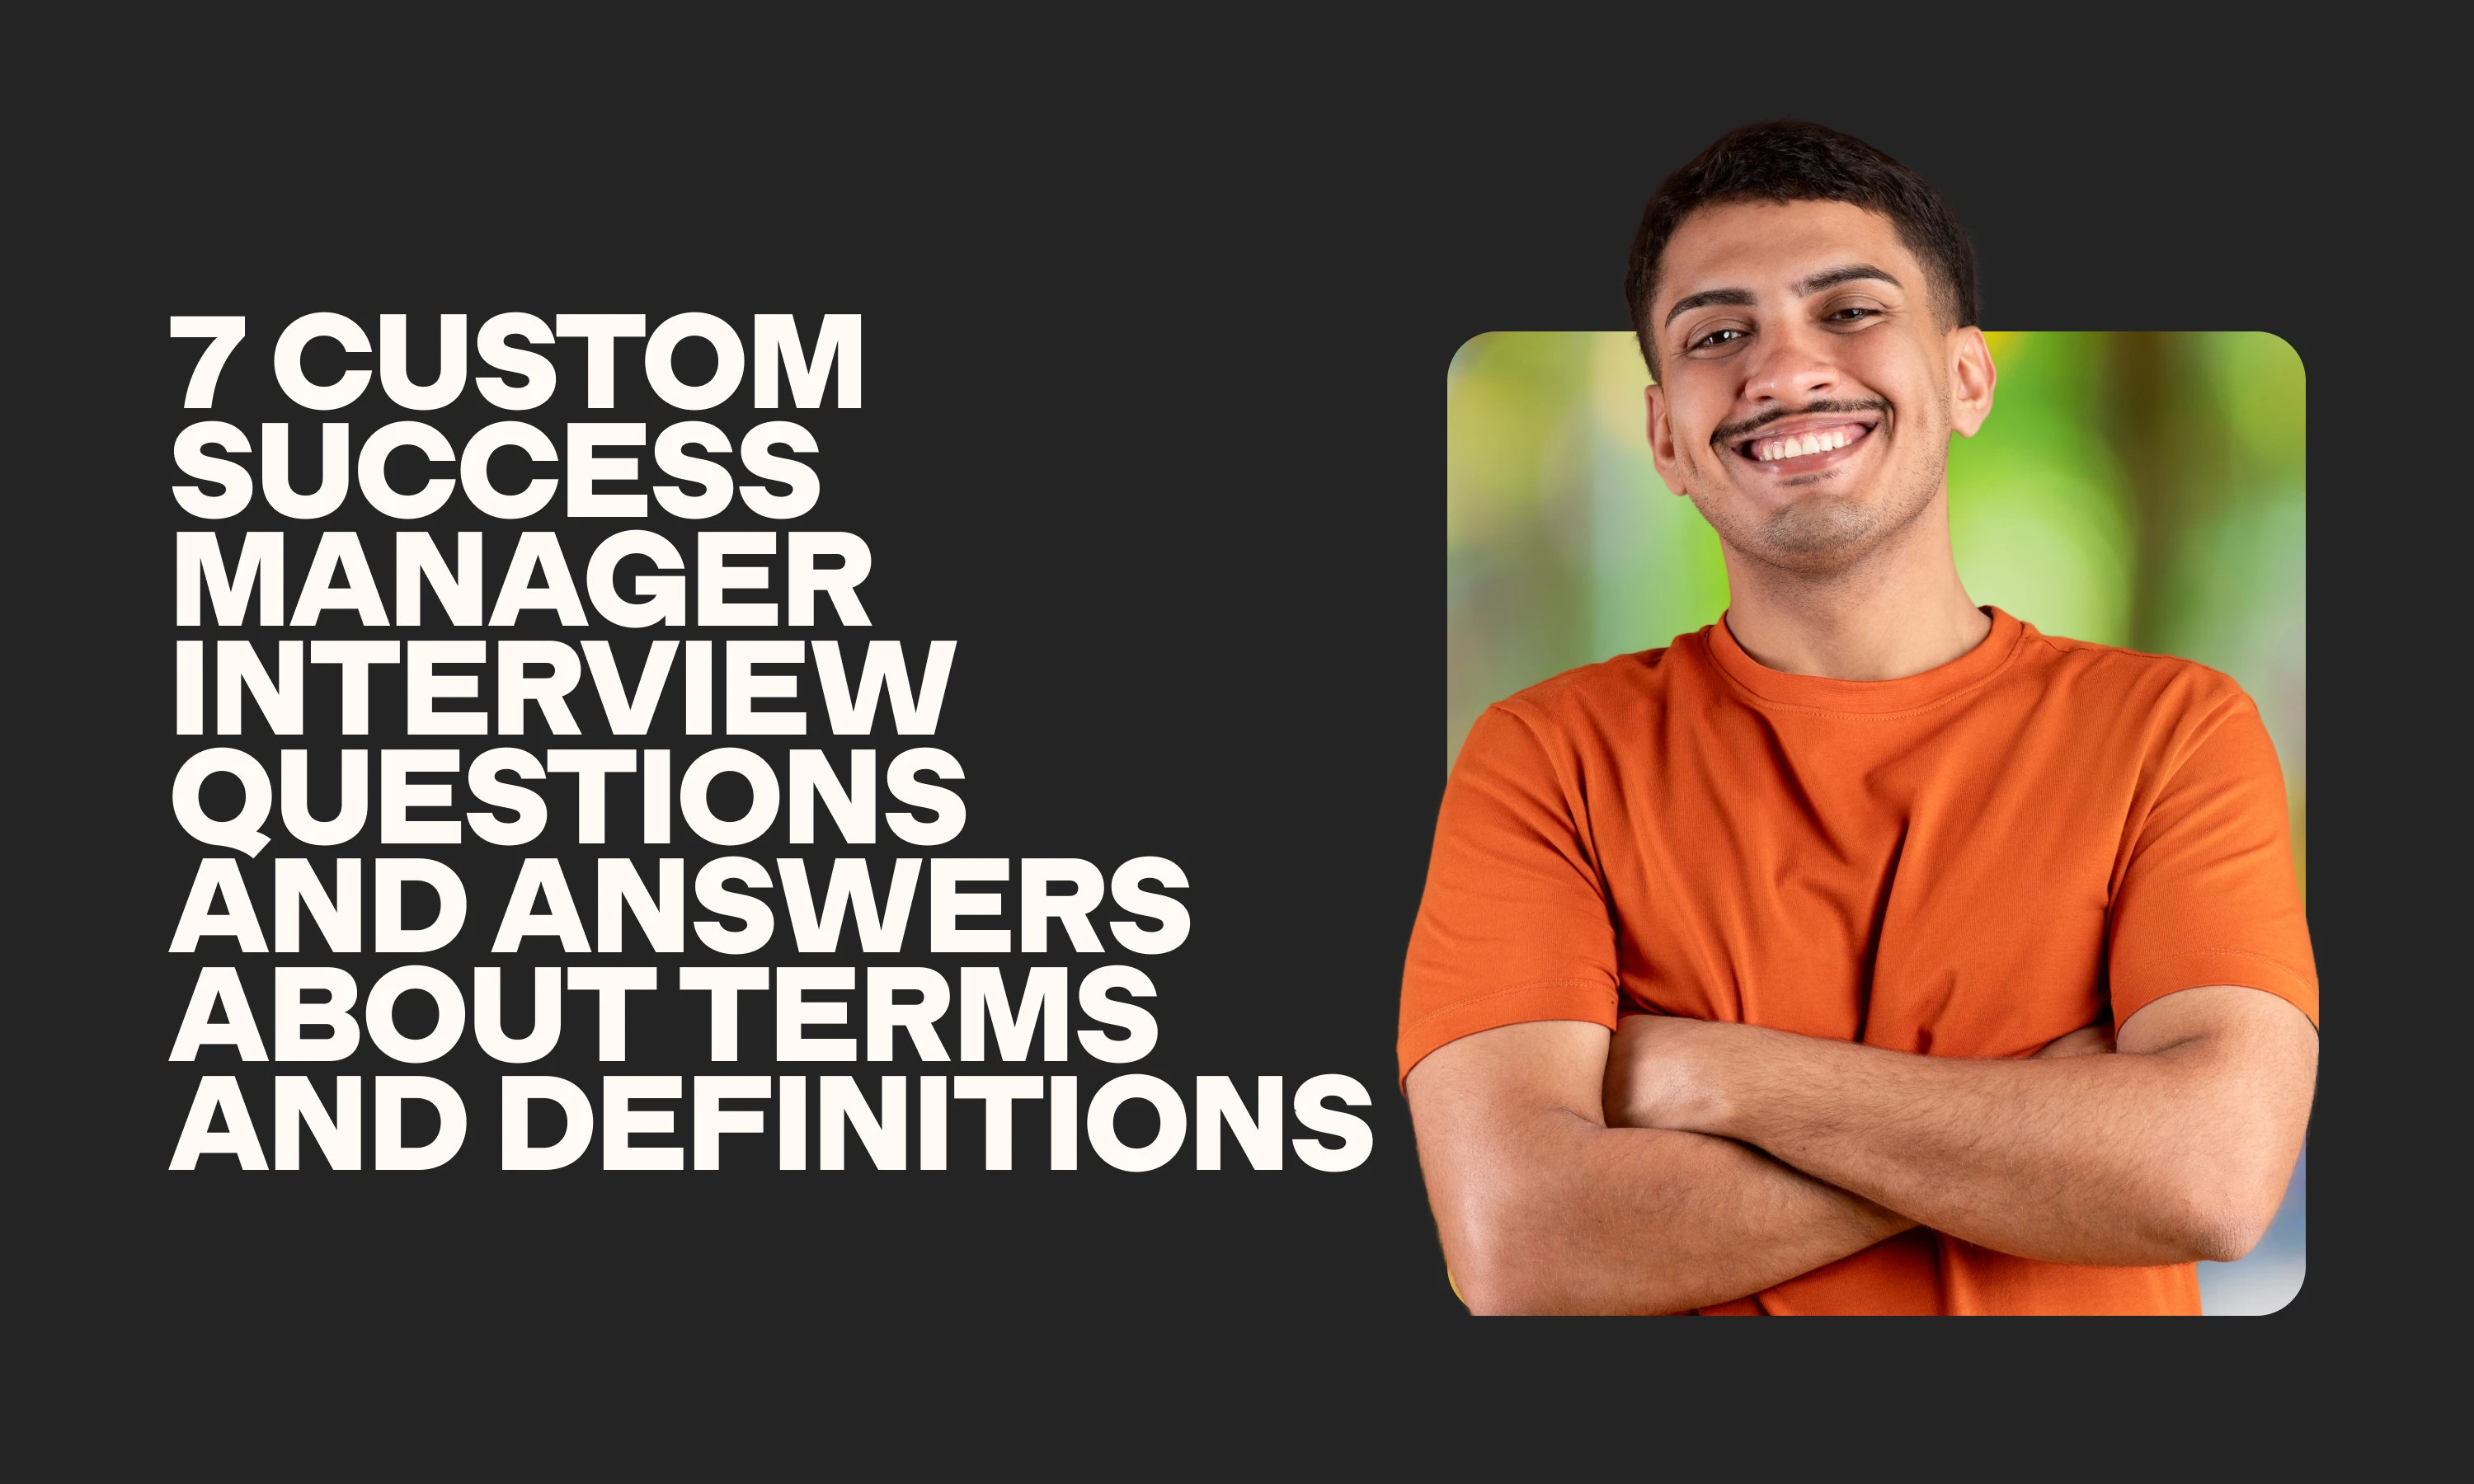 image showing customer success manager interview questions and answers about terms and definitions